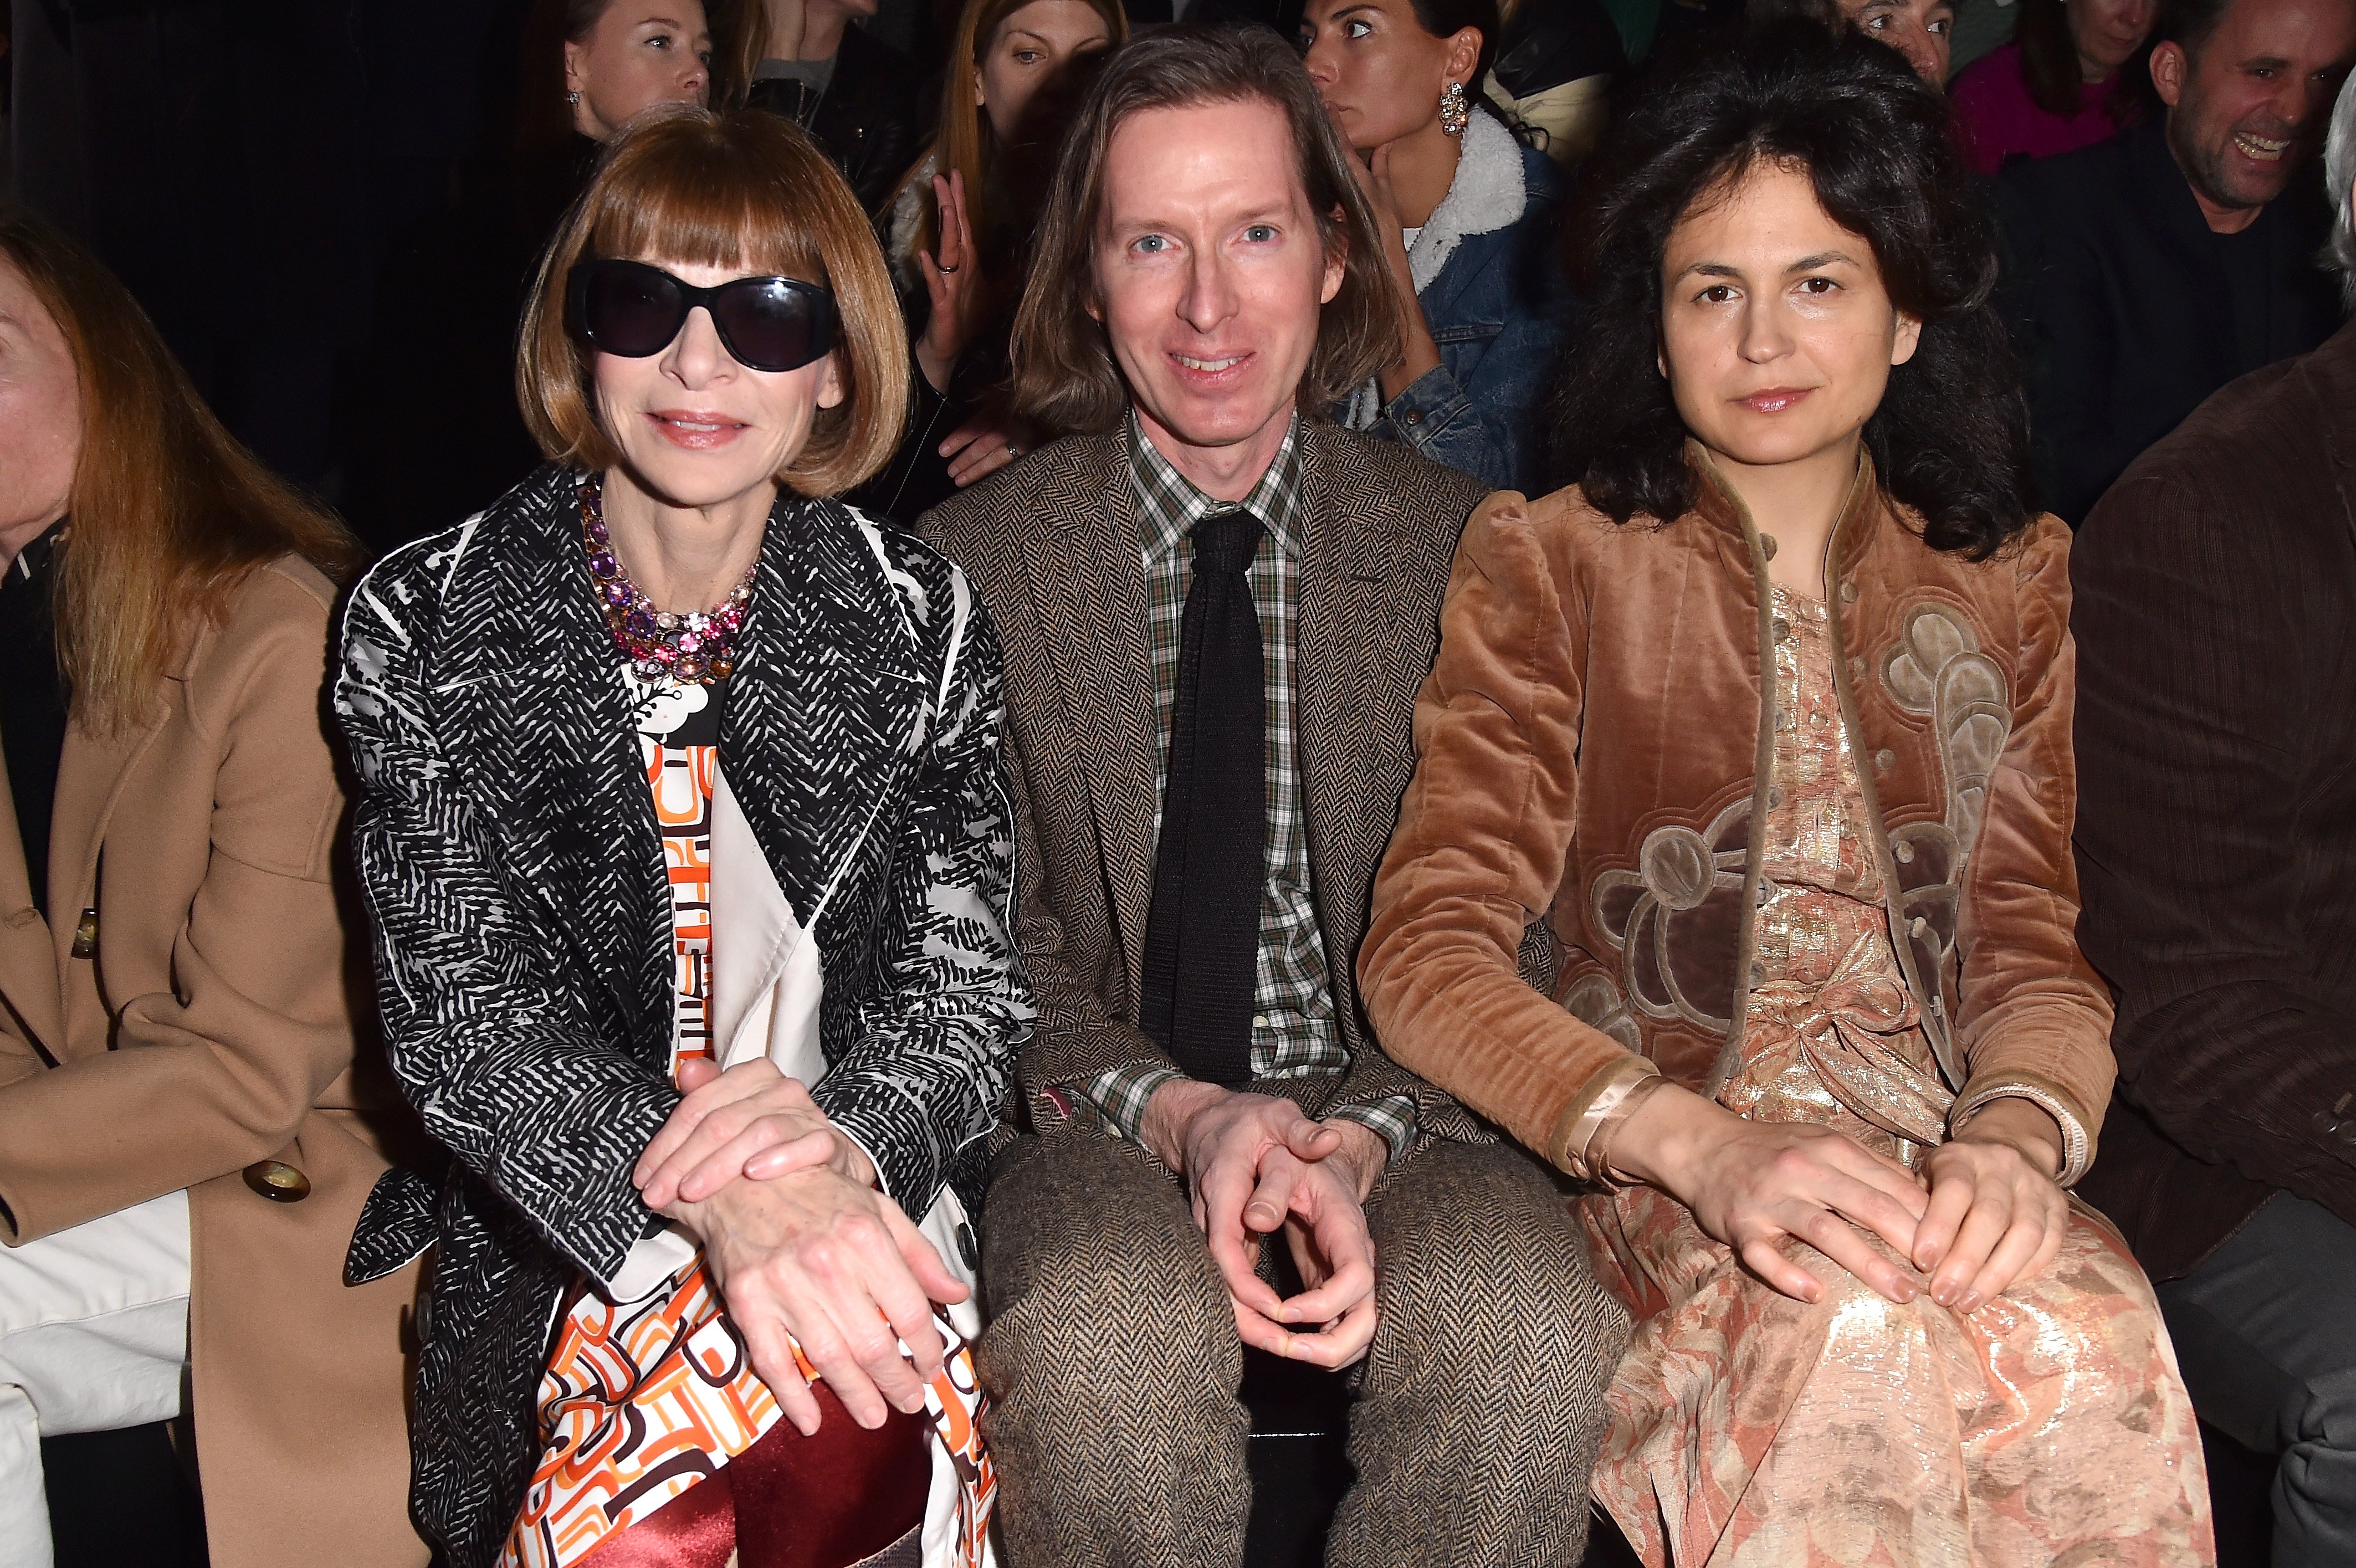 Wes Anderson, Juman Malouf, and Anna Wintour at Prada Fall/Winter 2018 Womenswear Fashion Show on February 22, 2018 in Milan | Source: Getty Images